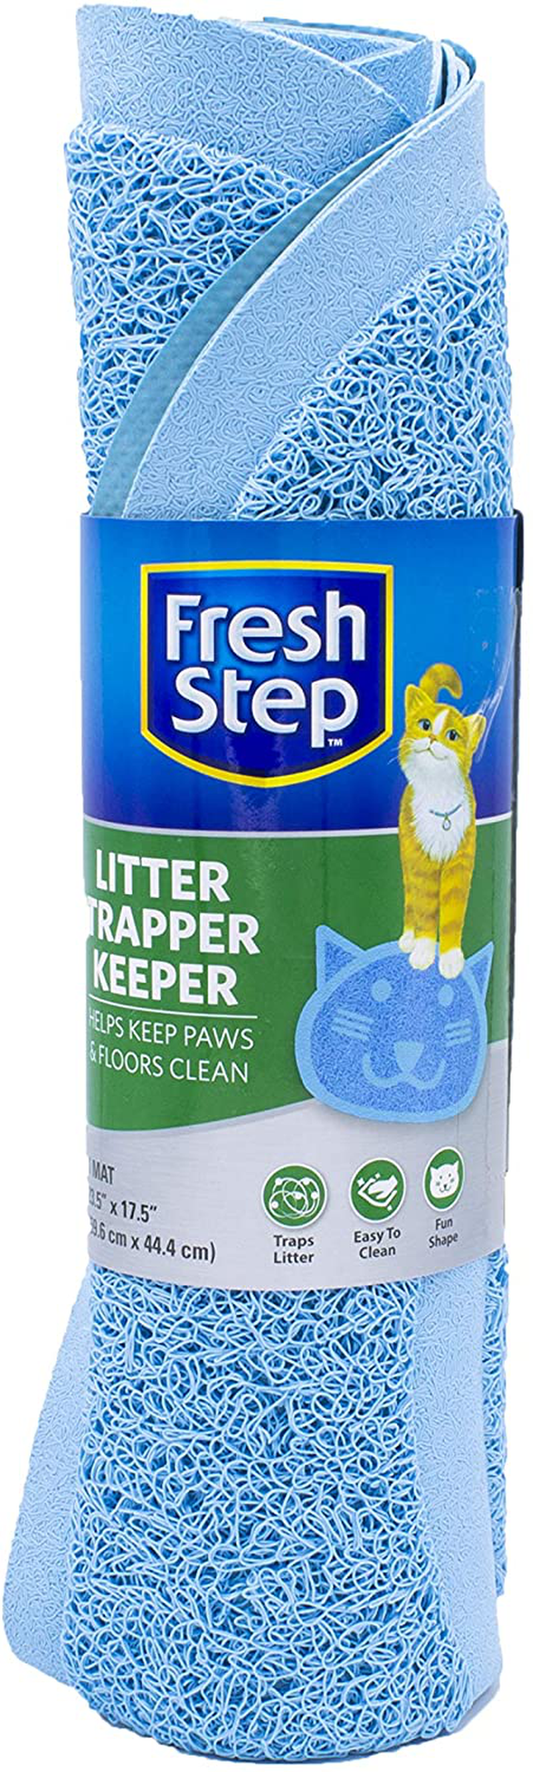 Fresh Step Recycled Plastic Litter Box and Cleanup Products for Cats - Cat Litter Scoops, Cat Litter Box, Pet Cat Litter Accessories - Kitty Litter Scooper, Cat Box, Litter Mat, and Cat Supplies Animals & Pet Supplies > Pet Supplies > Cat Supplies > Cat Litter Box Mats Fresh Step Litter Trapper Keeper Mat  